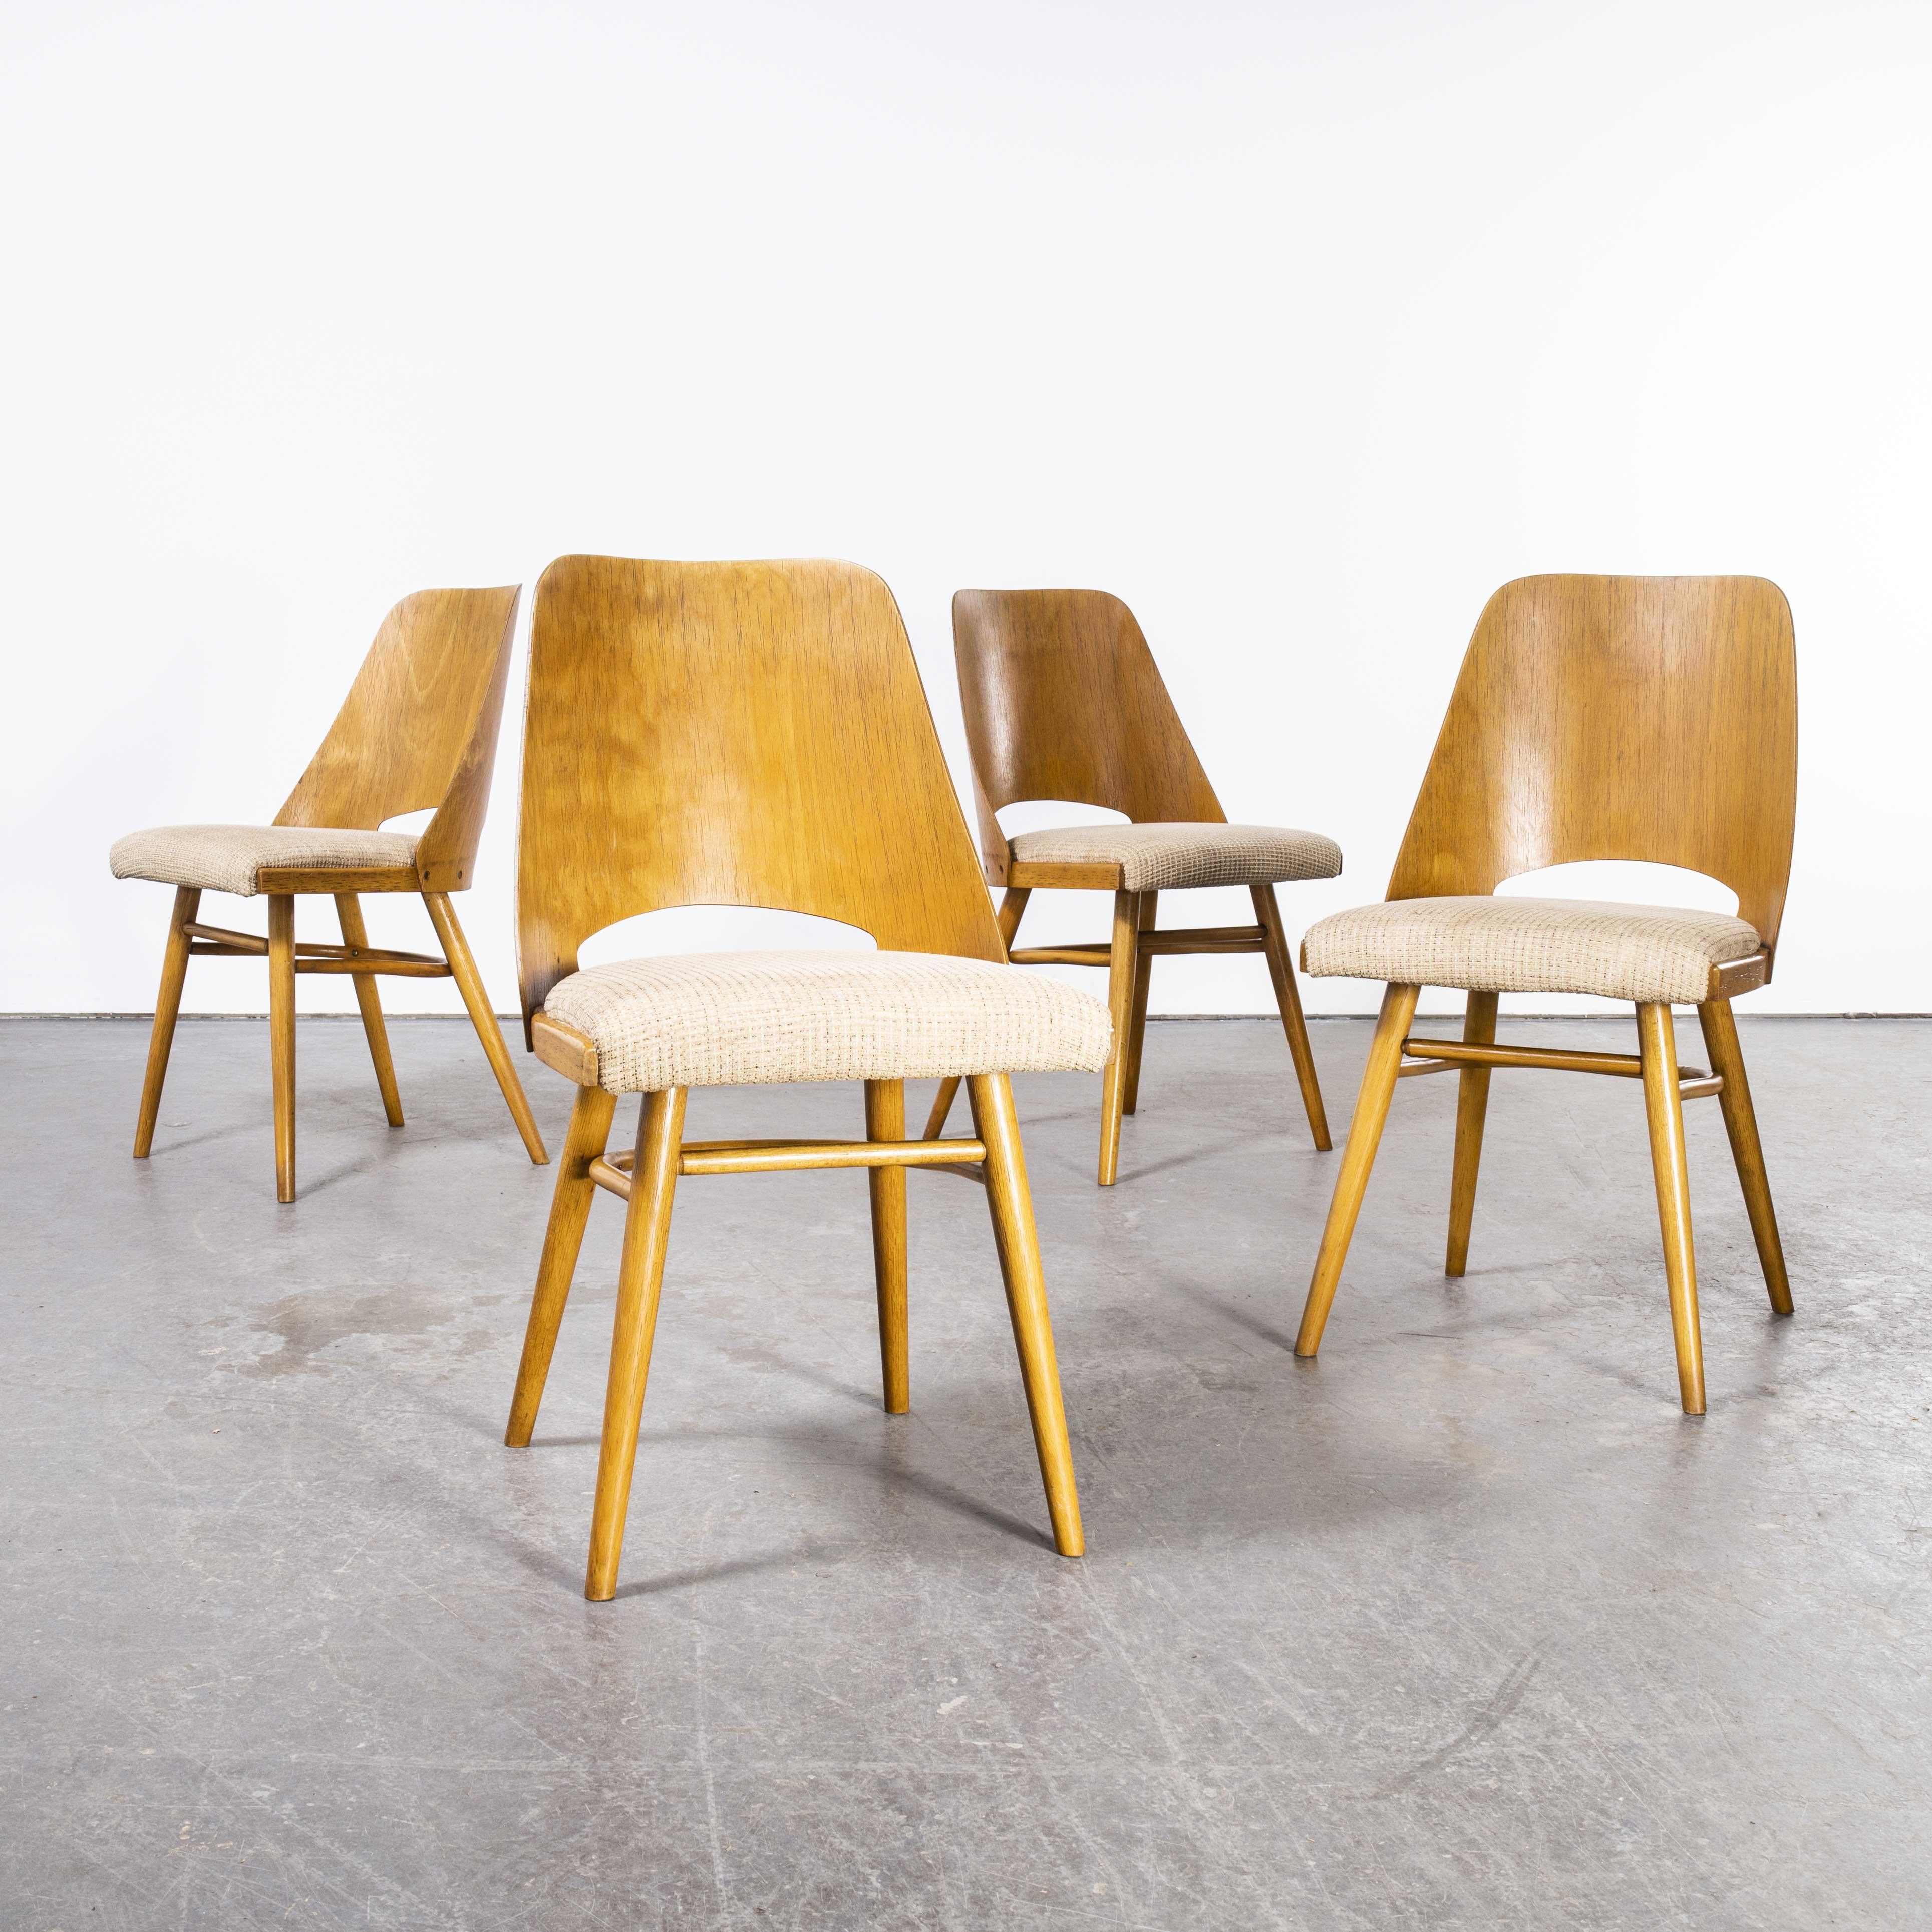 1950’s upholstered thon dining chairs by Radomir Hoffman – set of four
1950’s upholstered thon dining chairs by Radomir Hoffman – set of four. These chairs were produced by the famous Czech firm Ton, still trading today and producing beautiful